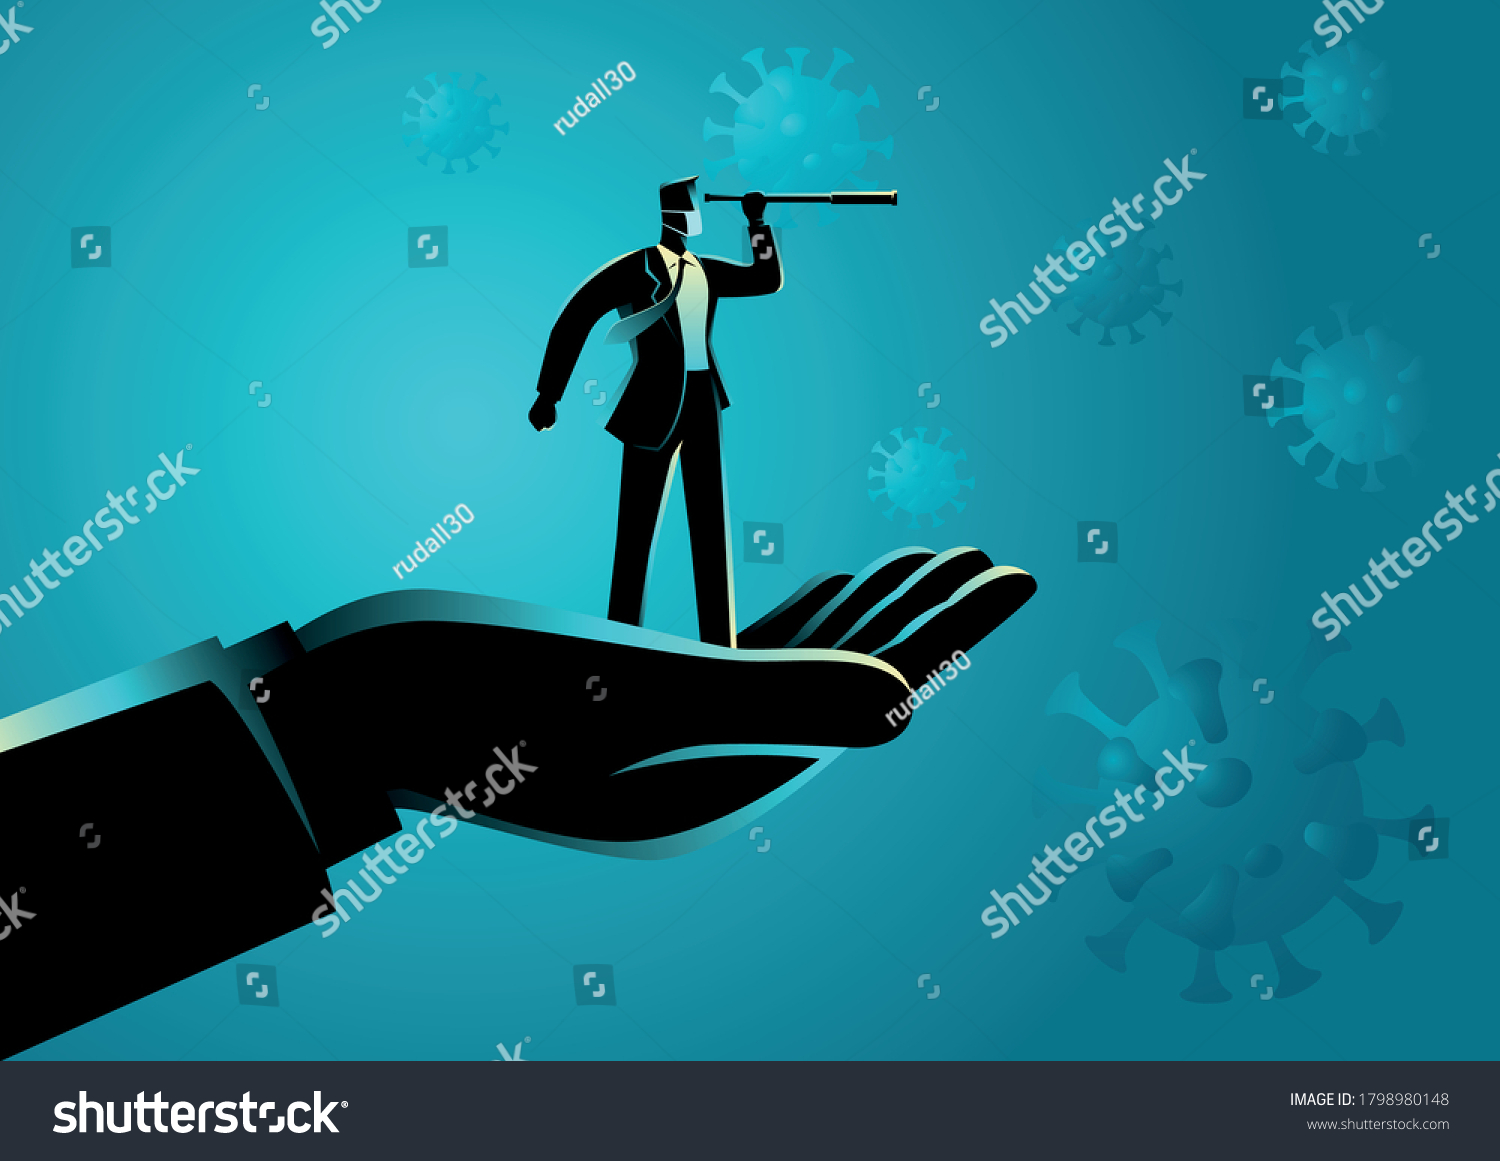 SVG of Giant hand lifting up a businessman using telescope with covid-19 viruses on the background. Covid-19 impacts to business, business vector illustration series svg